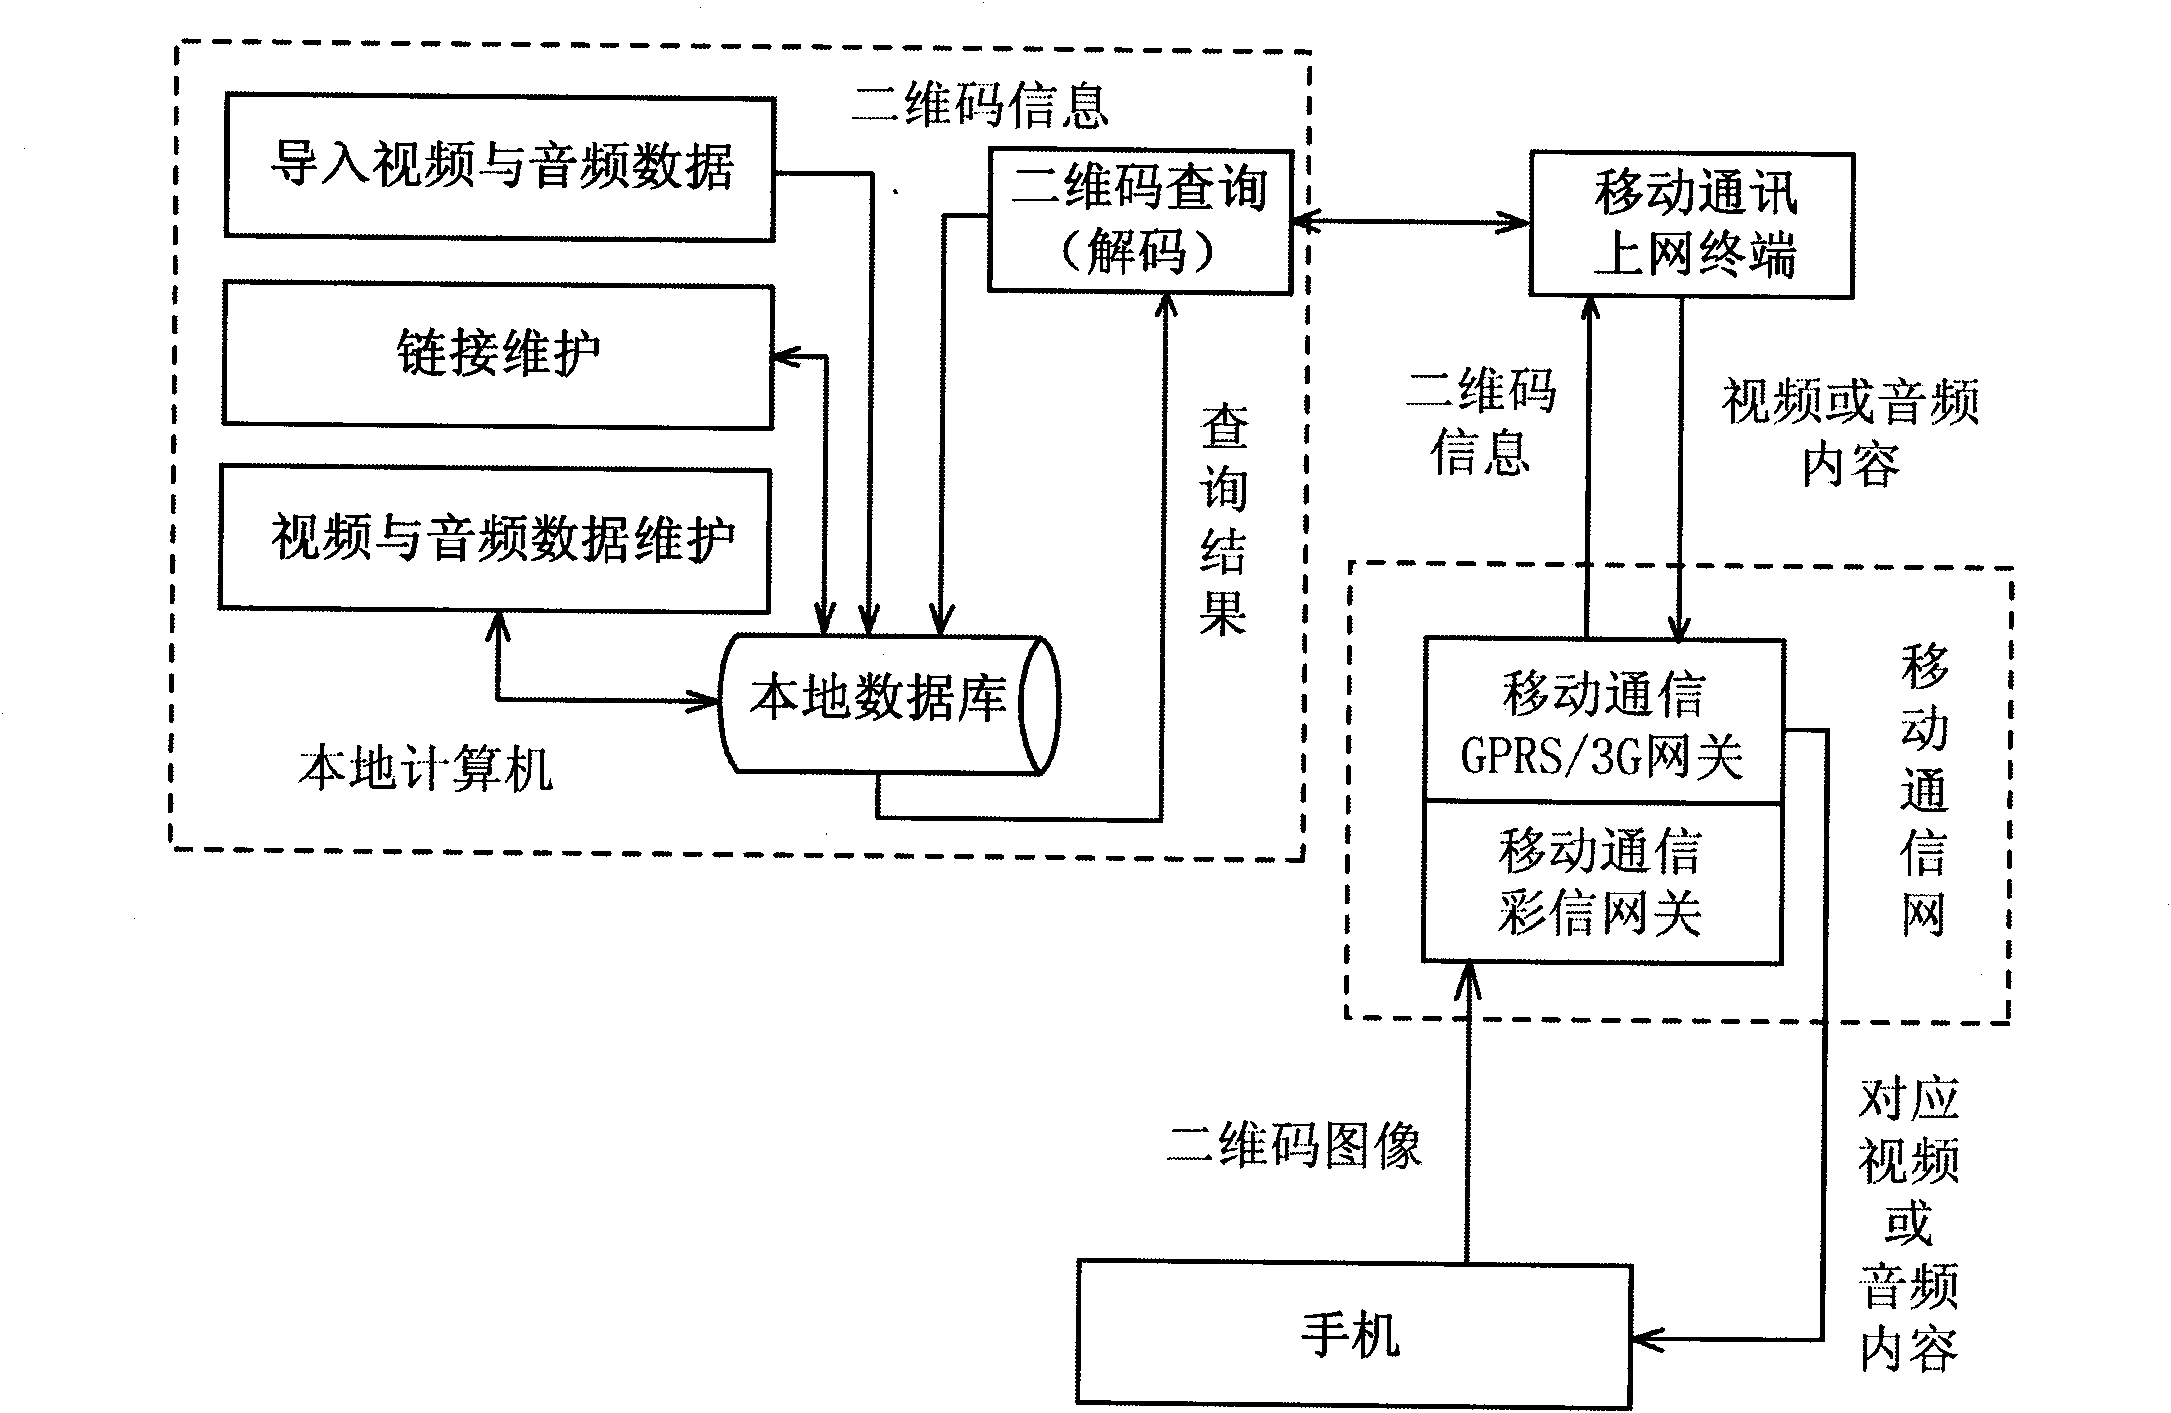 Sight spot information self-service query system and method